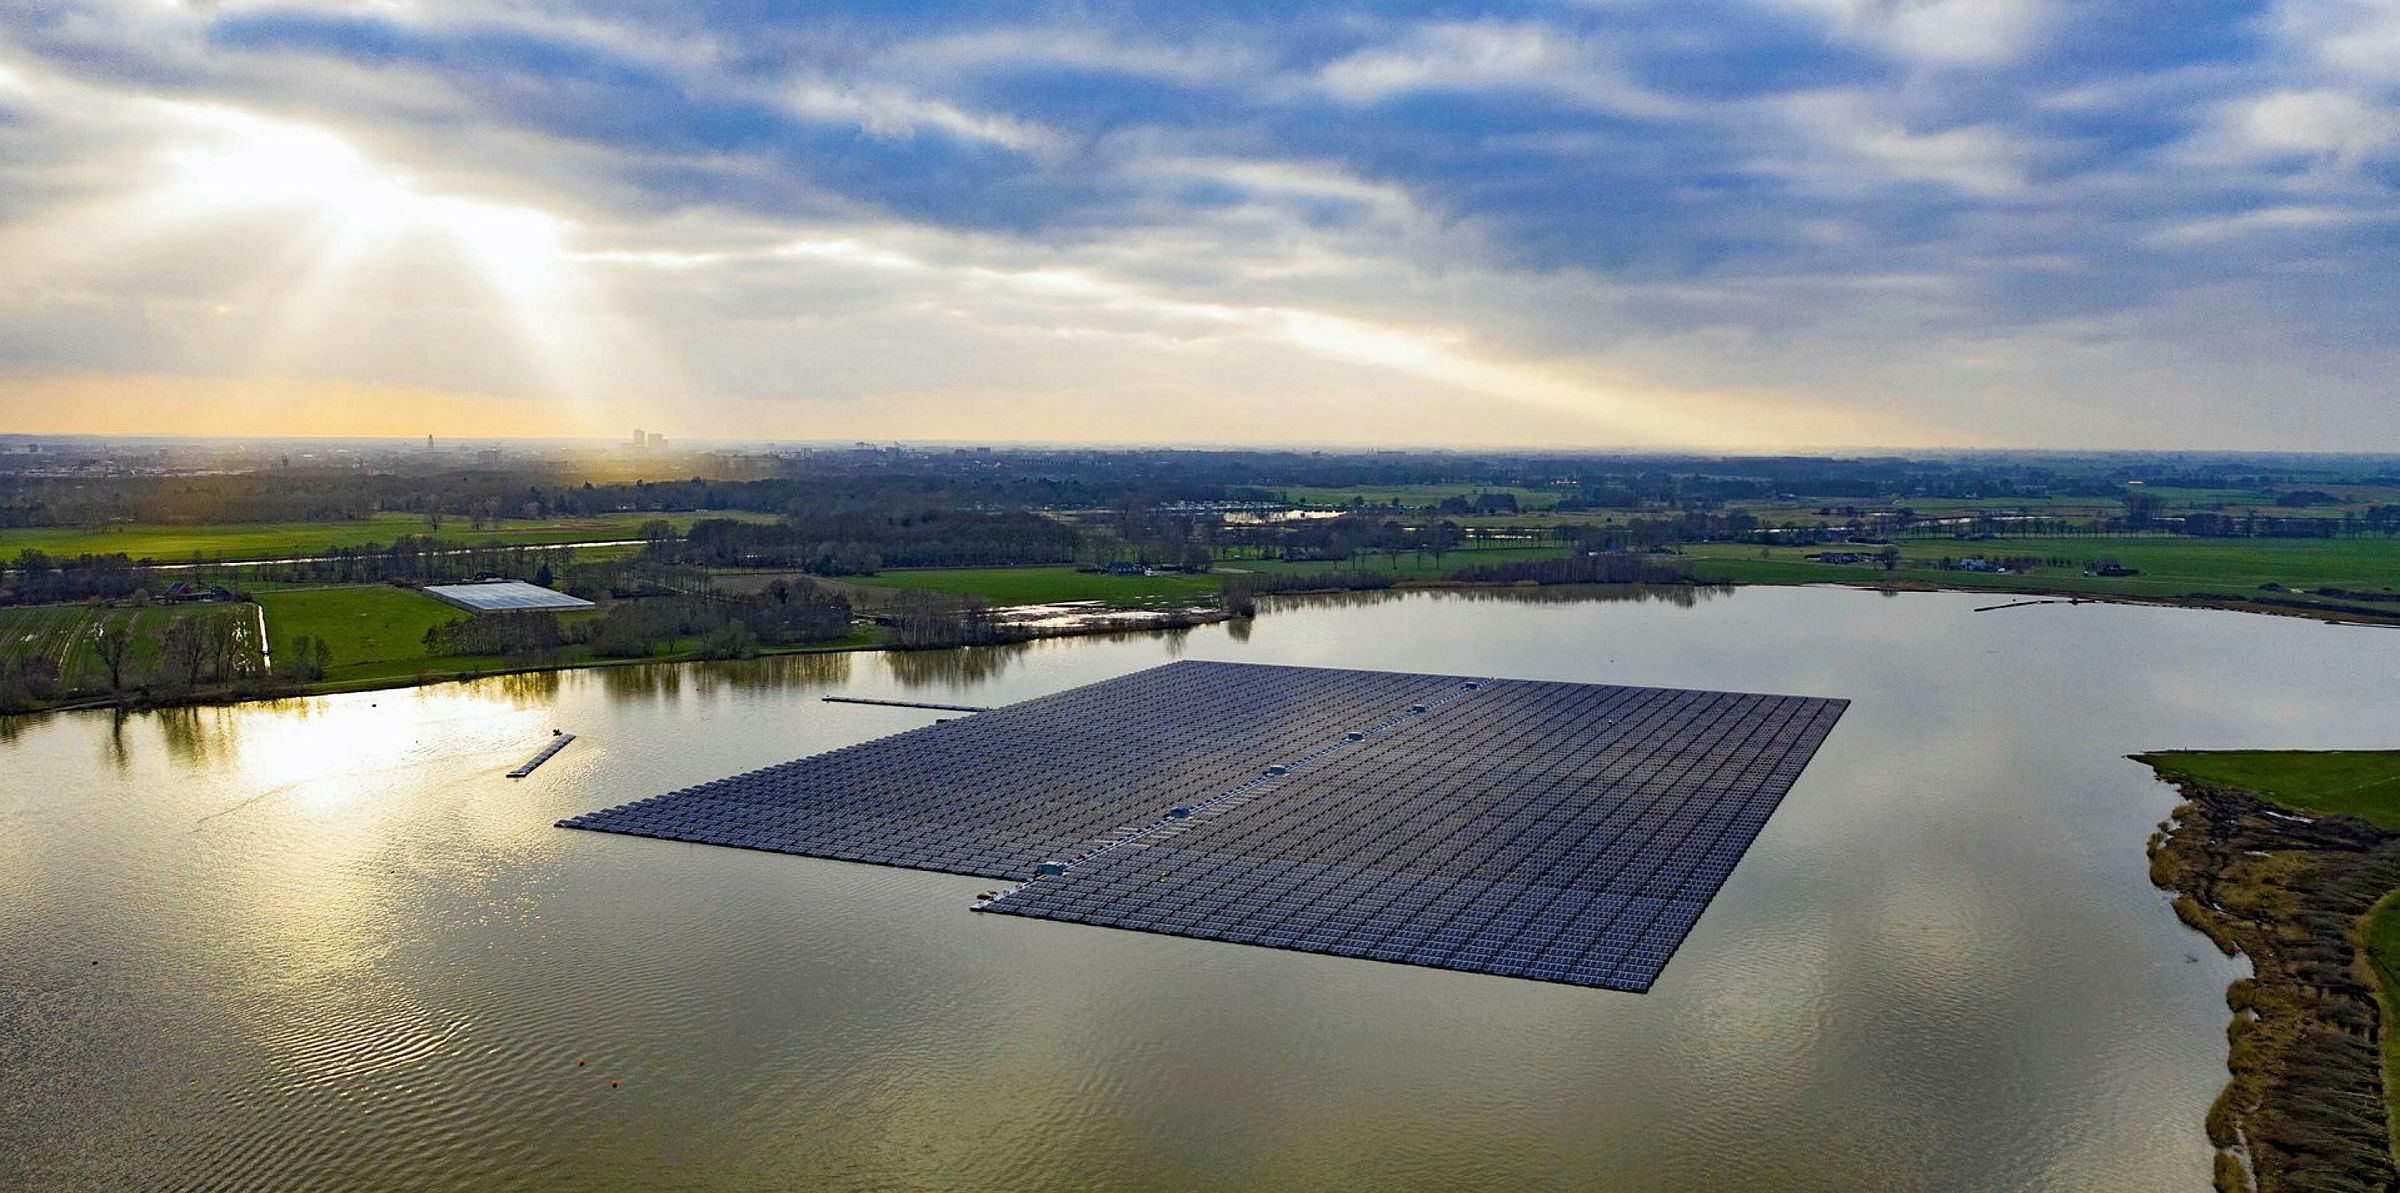 World's largest floating solar plant outside China' ready in weeks after  'record' build | Recharge